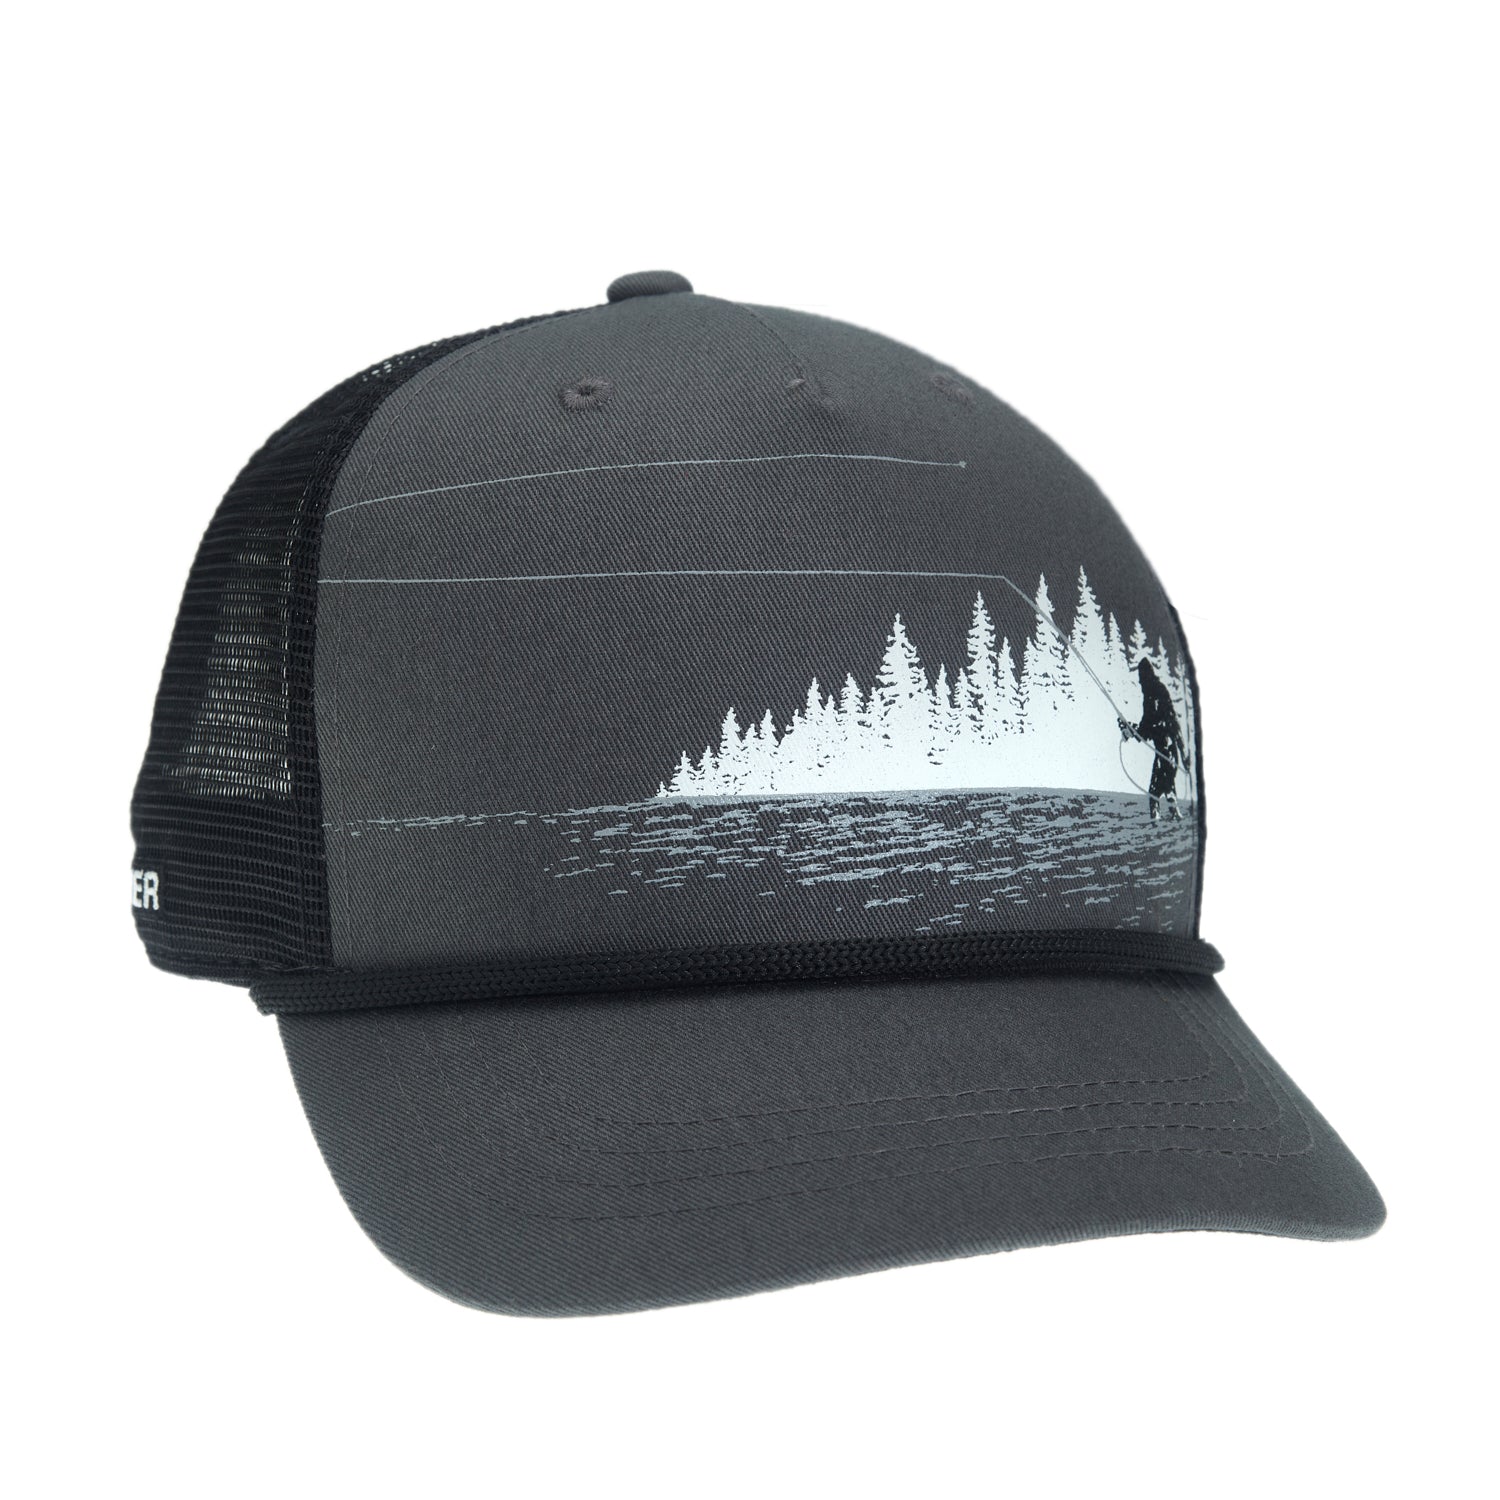 White Whale Dad Hat by Jeremy Fish